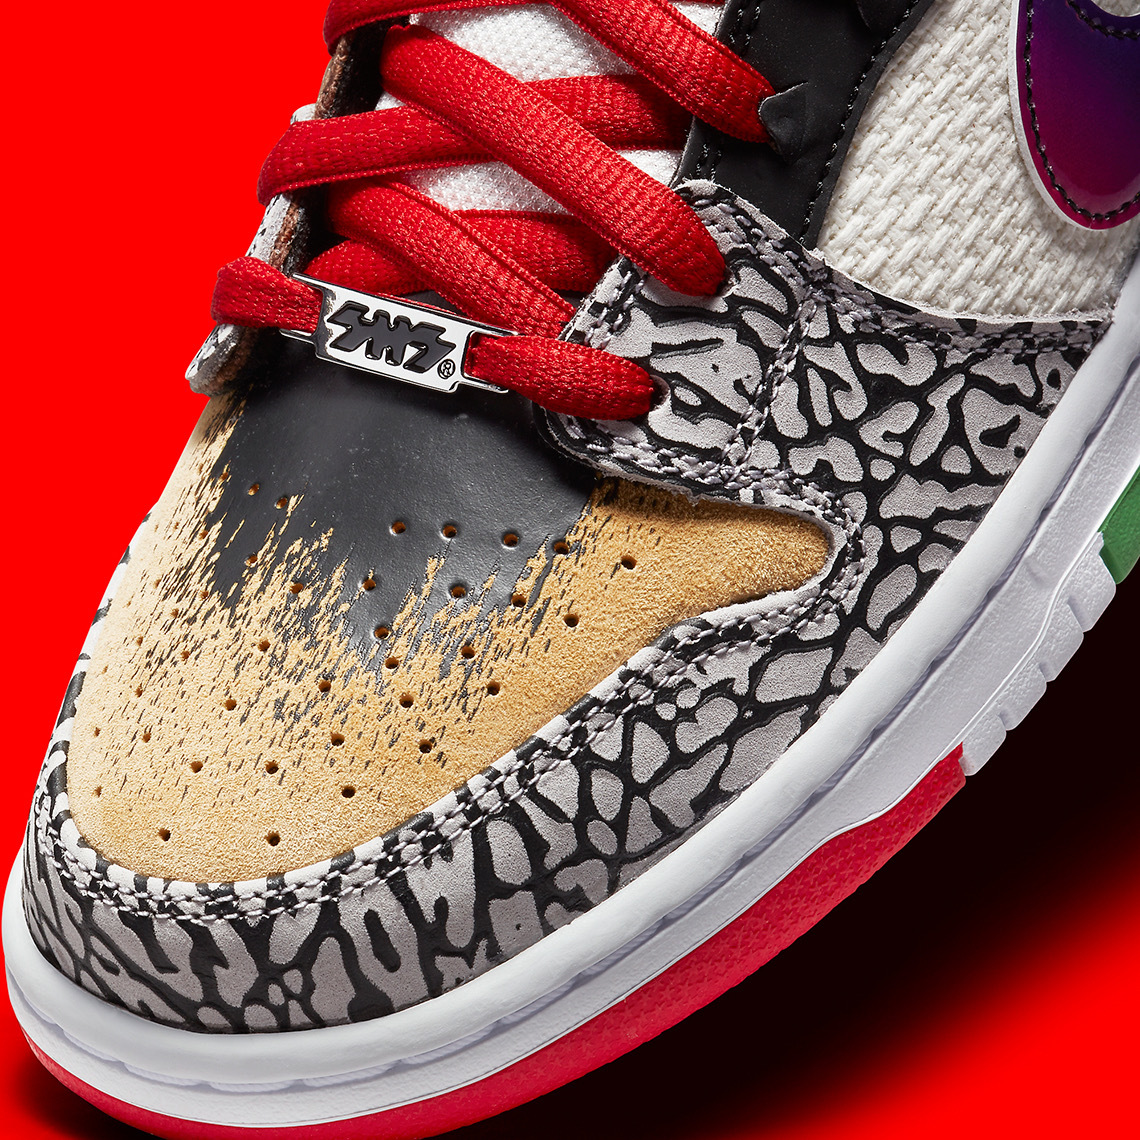 Nike SB Mingled All of Paul Rodriguez’s Best Sneakers Into One